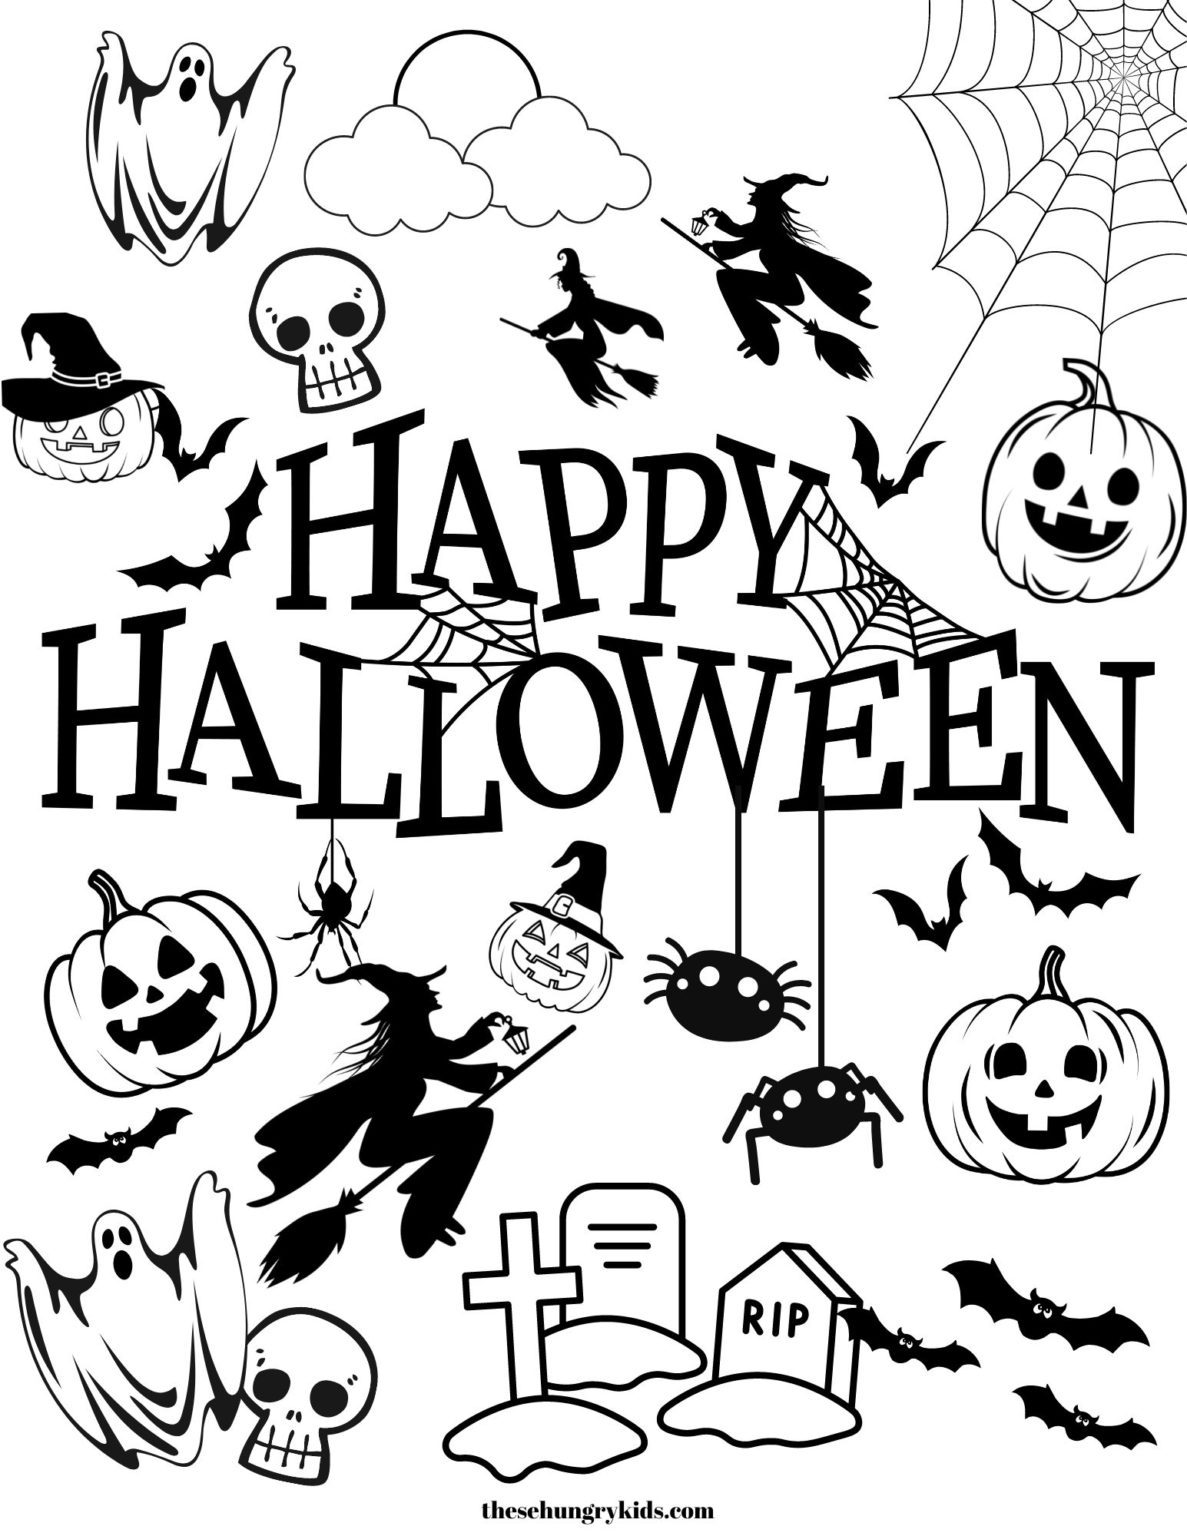 FREE DOWNLOAD: 4 Spook-tacular Halloween Coloring Pages - These Hungry Kids